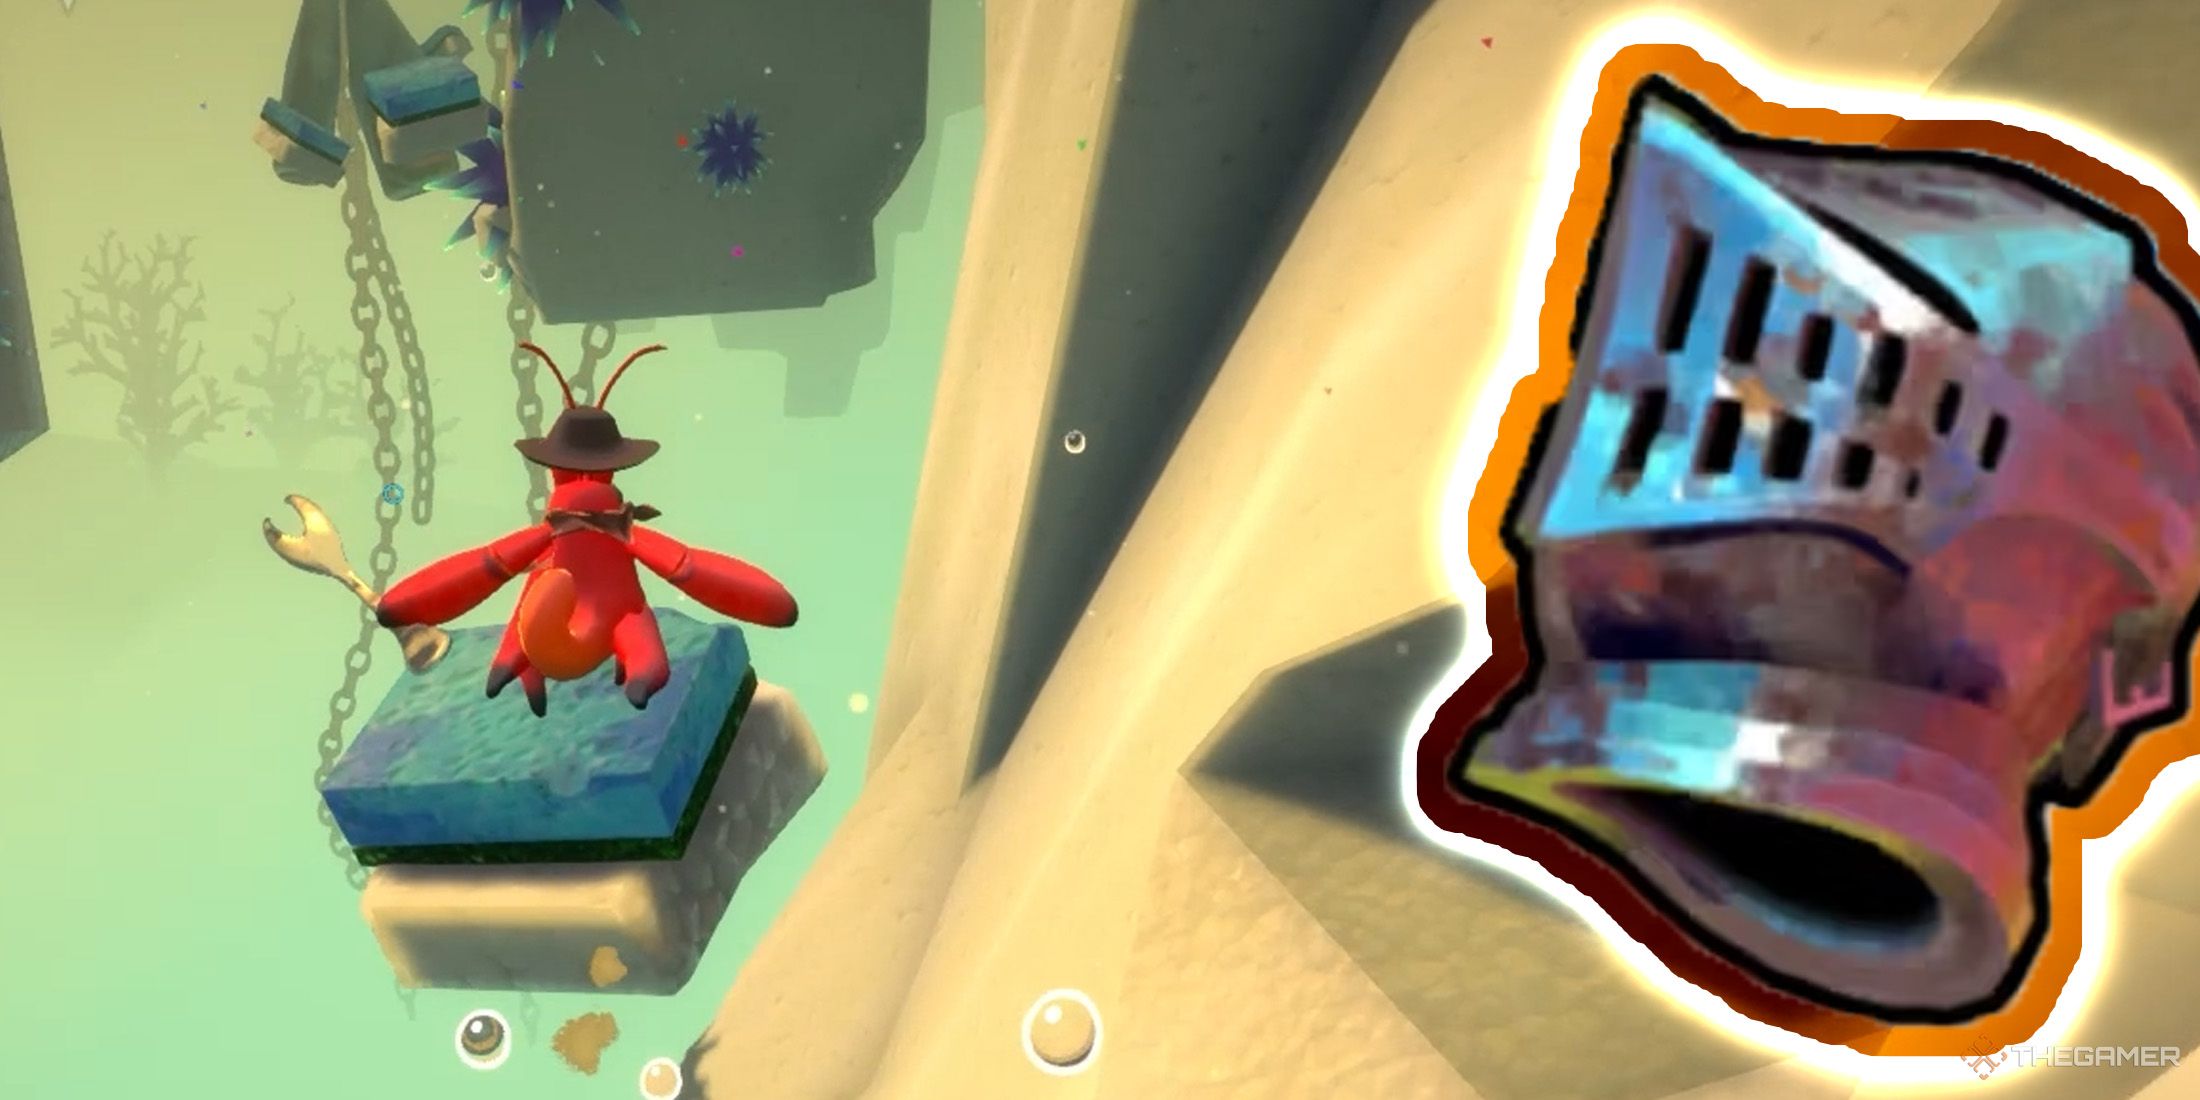 Another Crab's Treasure - Kril is jumping towards to blue sponge and a Knight's Helmet shell on right side